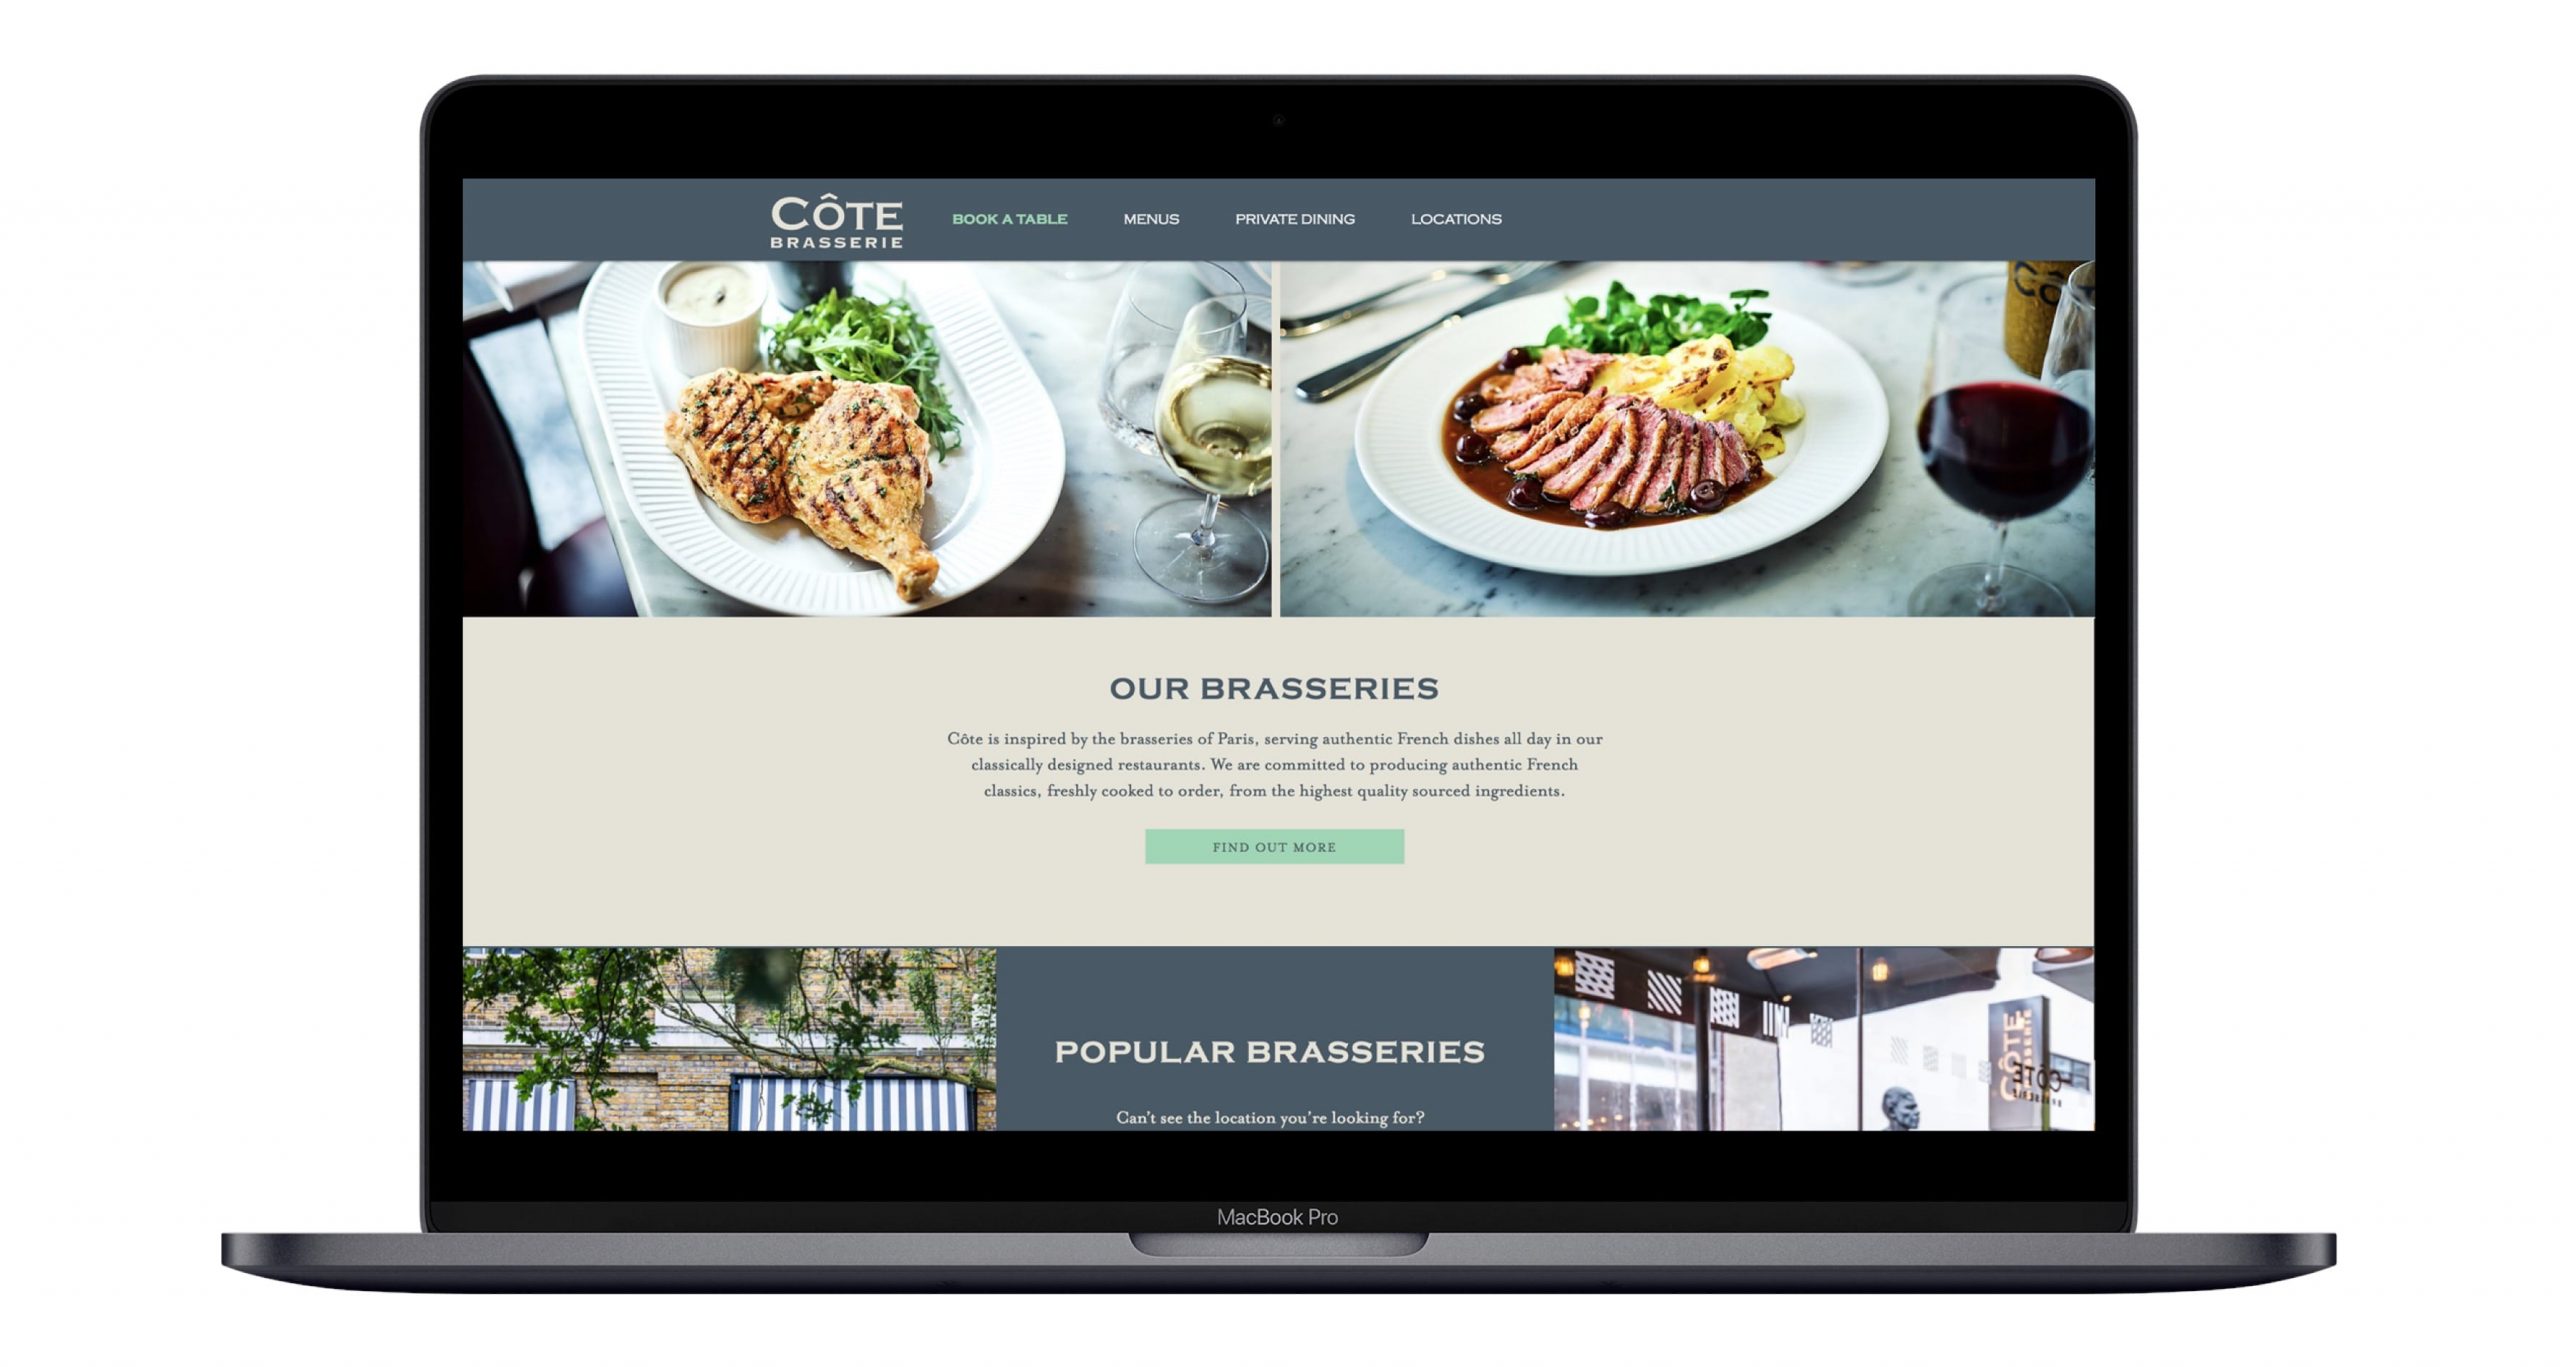 Côte Brasserie website, two plates of food with wine